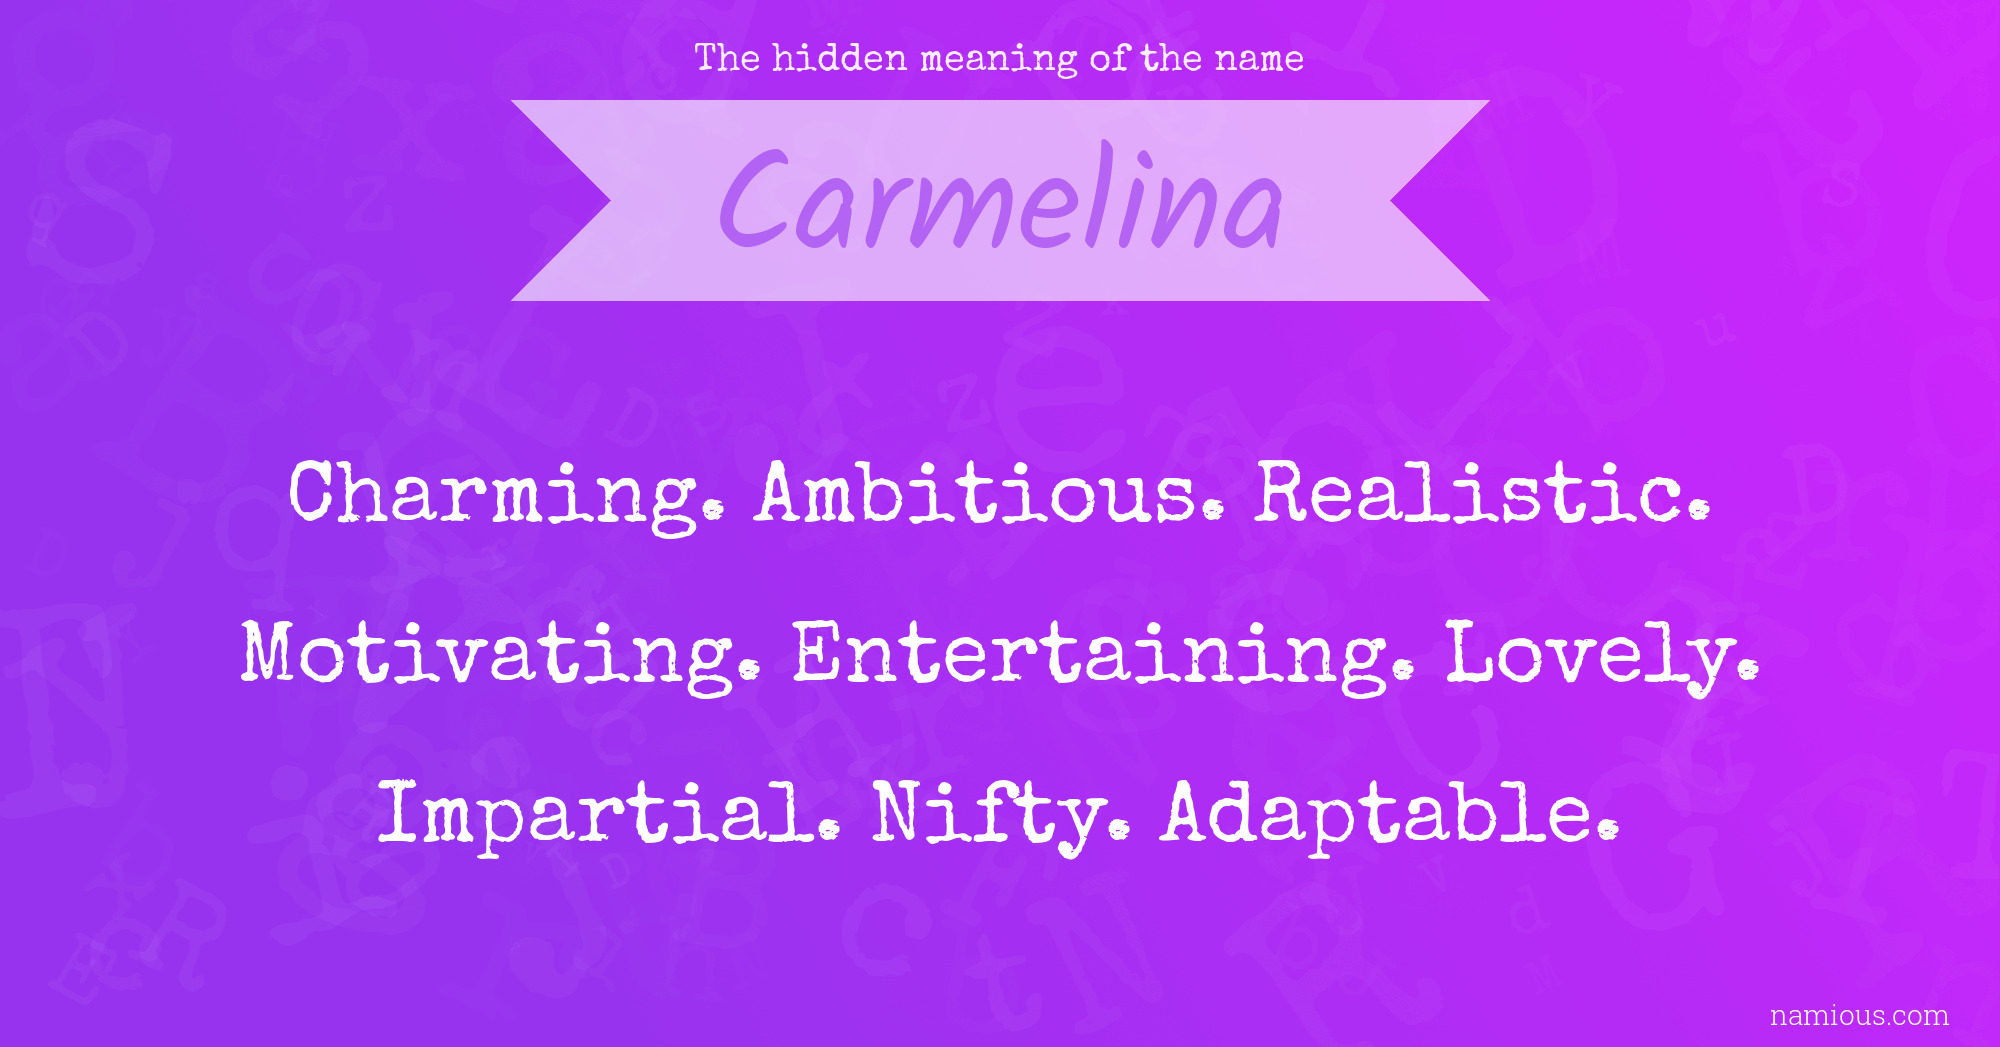 The hidden meaning of the name Carmelina